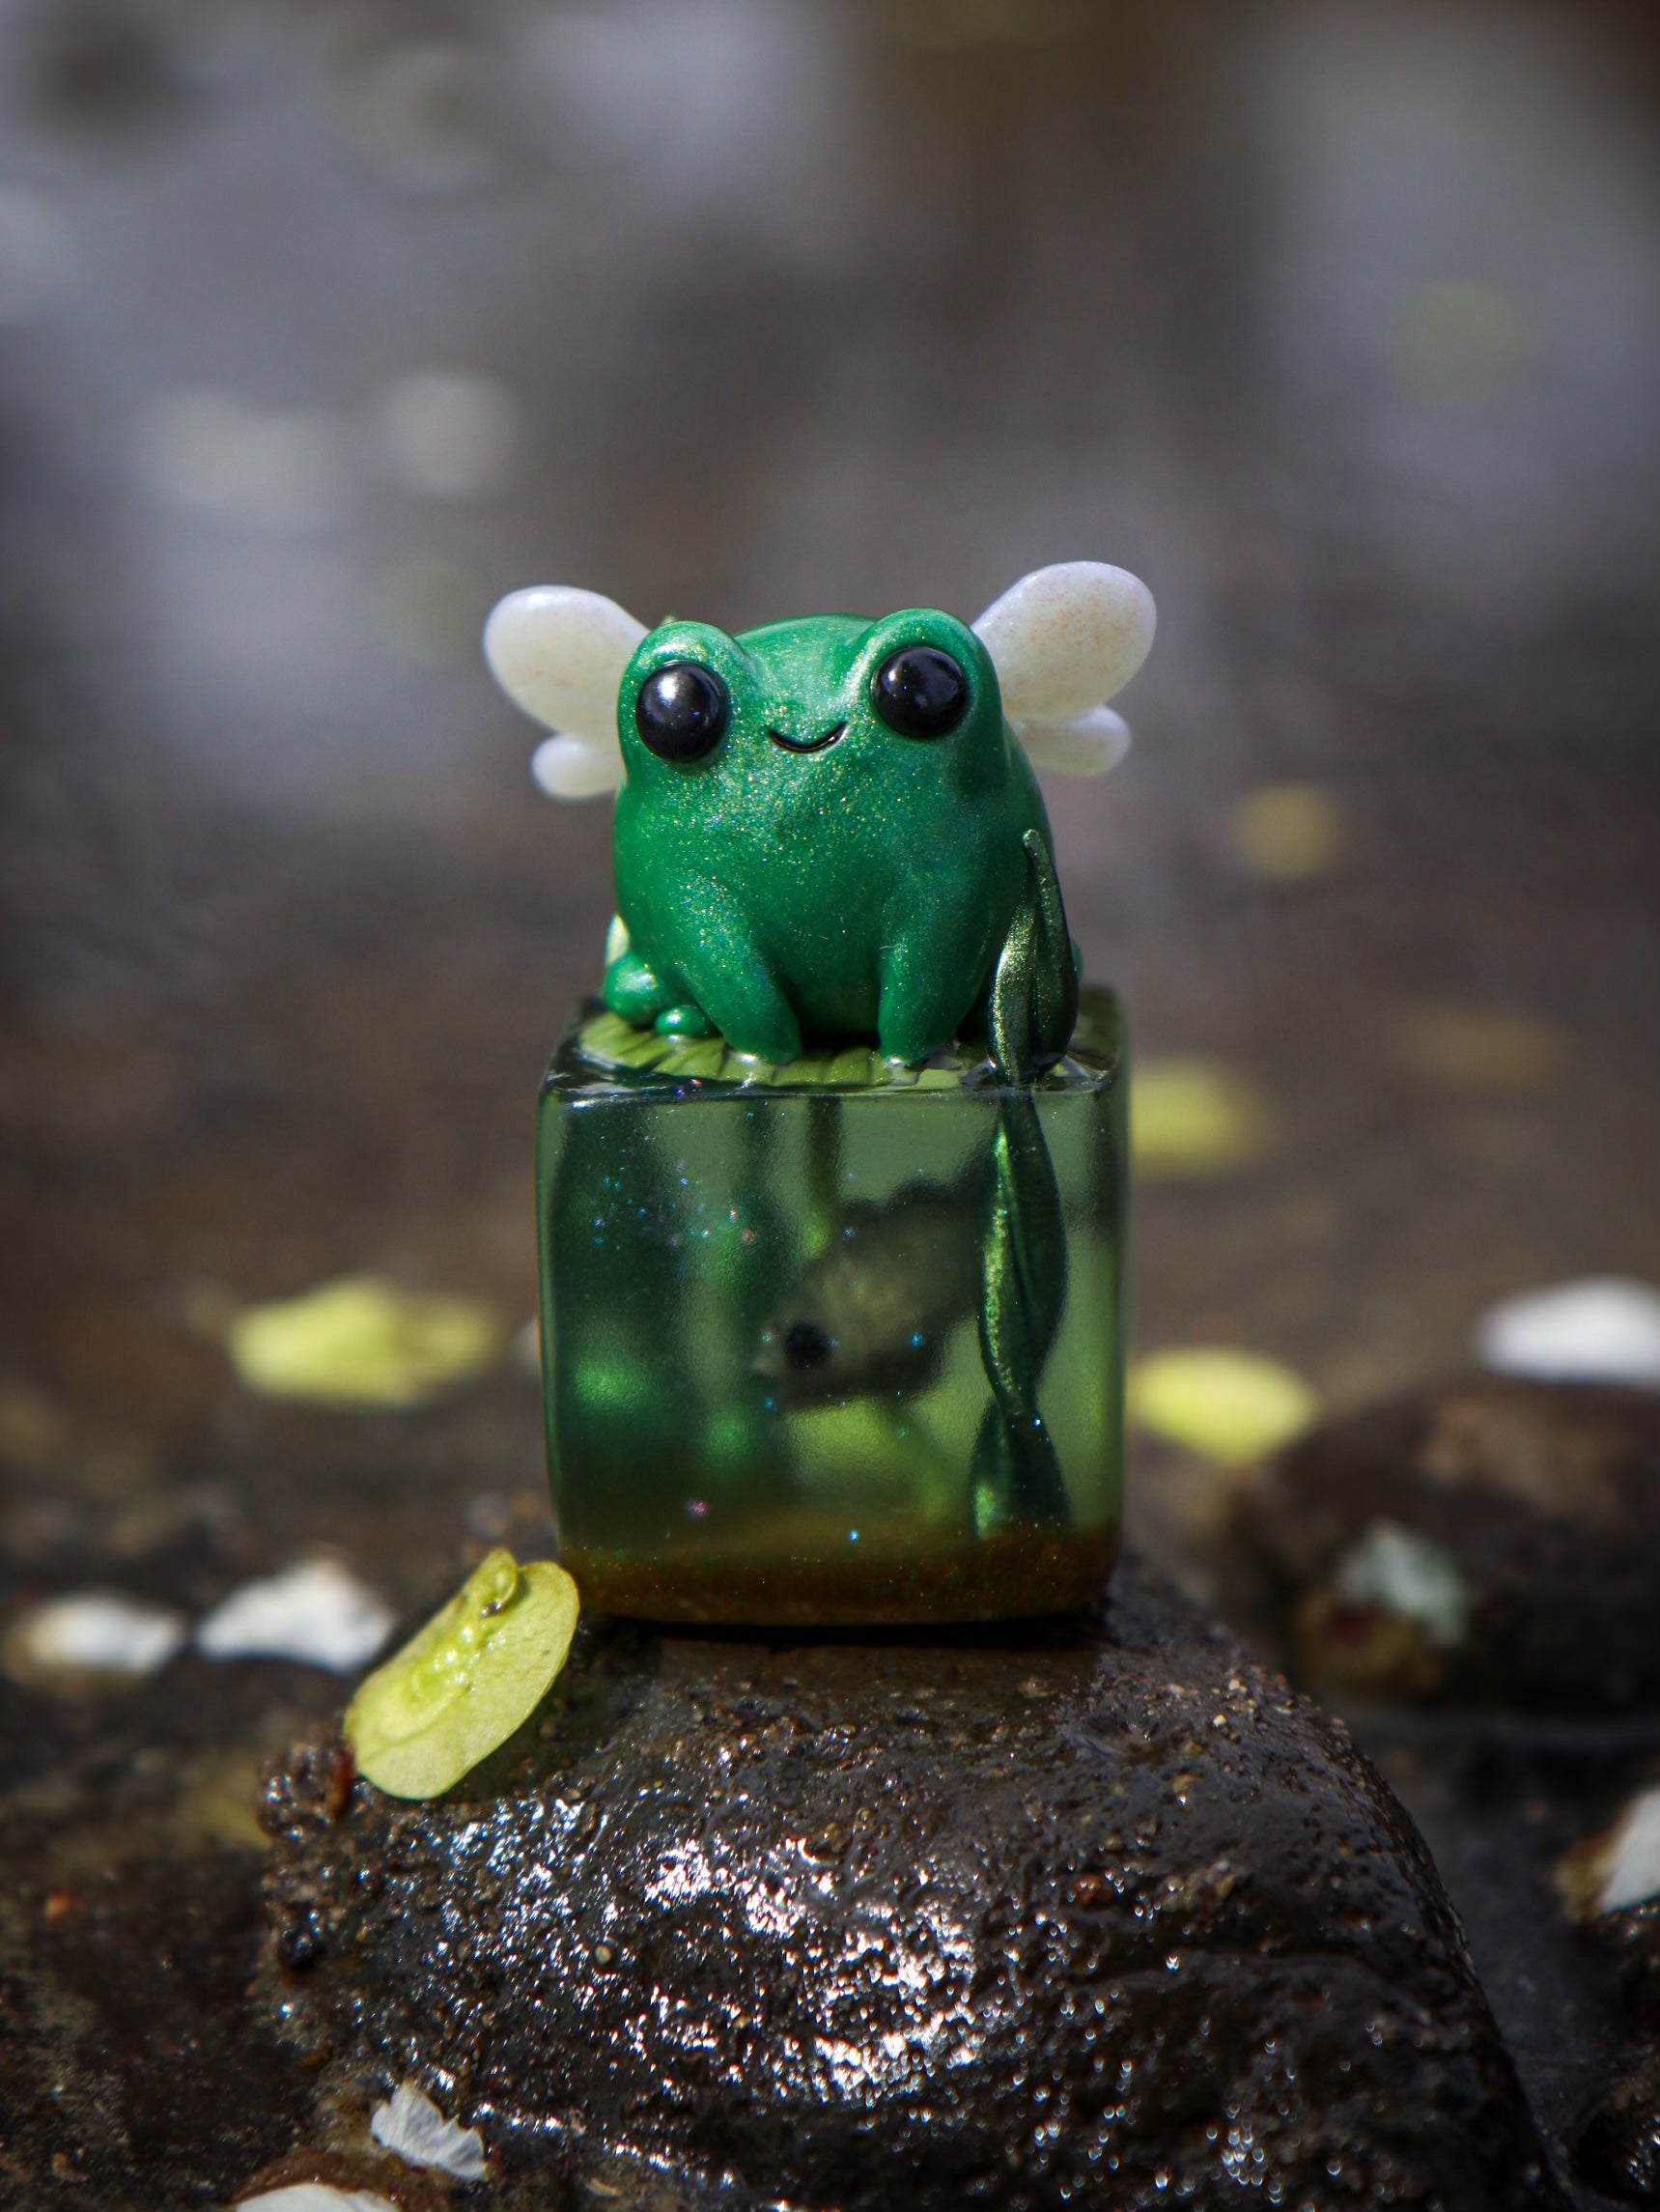 A small green frog figurine with wings on a cube, part of the Little Shit Big Deal - CUBES collection by Fairies And Fancies. Sculpted by Dr. Polpz. Ships randomly.